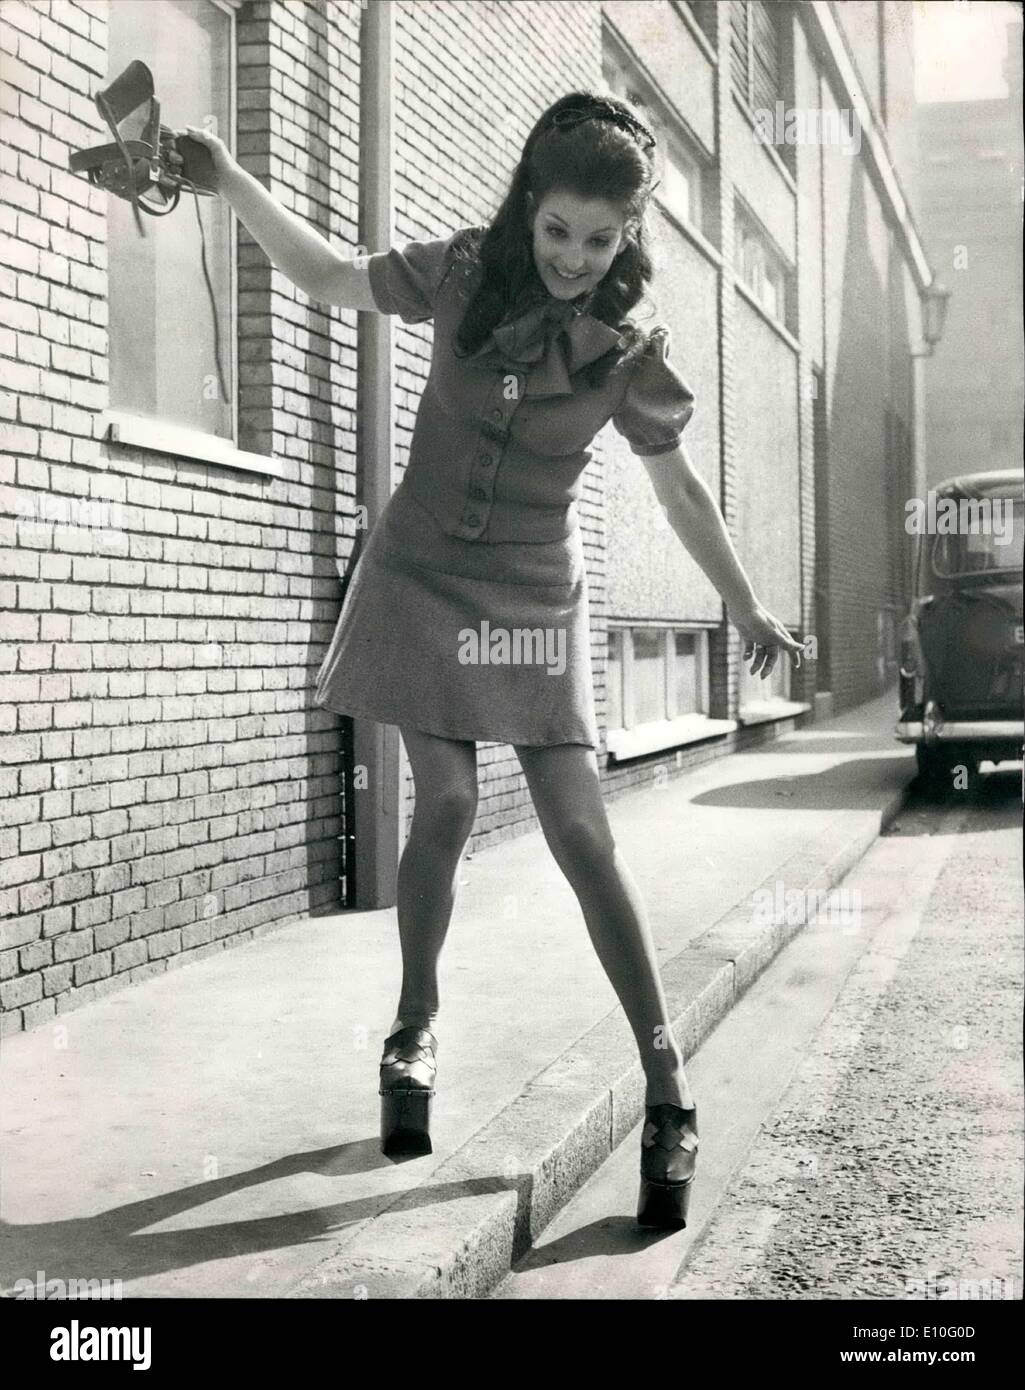 Oct. 10, 1972 - Walking Tall: London model Madeleine Bradley has that up-in-the-air feeling. And no wonder - for she's walking on 8'' high heels, though she has to carefully negotiate the kerb when wearing them. Says shoe importer Vernon Humpage, of Blackpool: ''It's a shoe designed with Women's Lib in mine - they allow even the smallest girl to look down on her man.'' They were being shown at the Spring Shoe Exhibition, organised by the British Footwear Manufacturers Federation, being held in London. Stock Photo